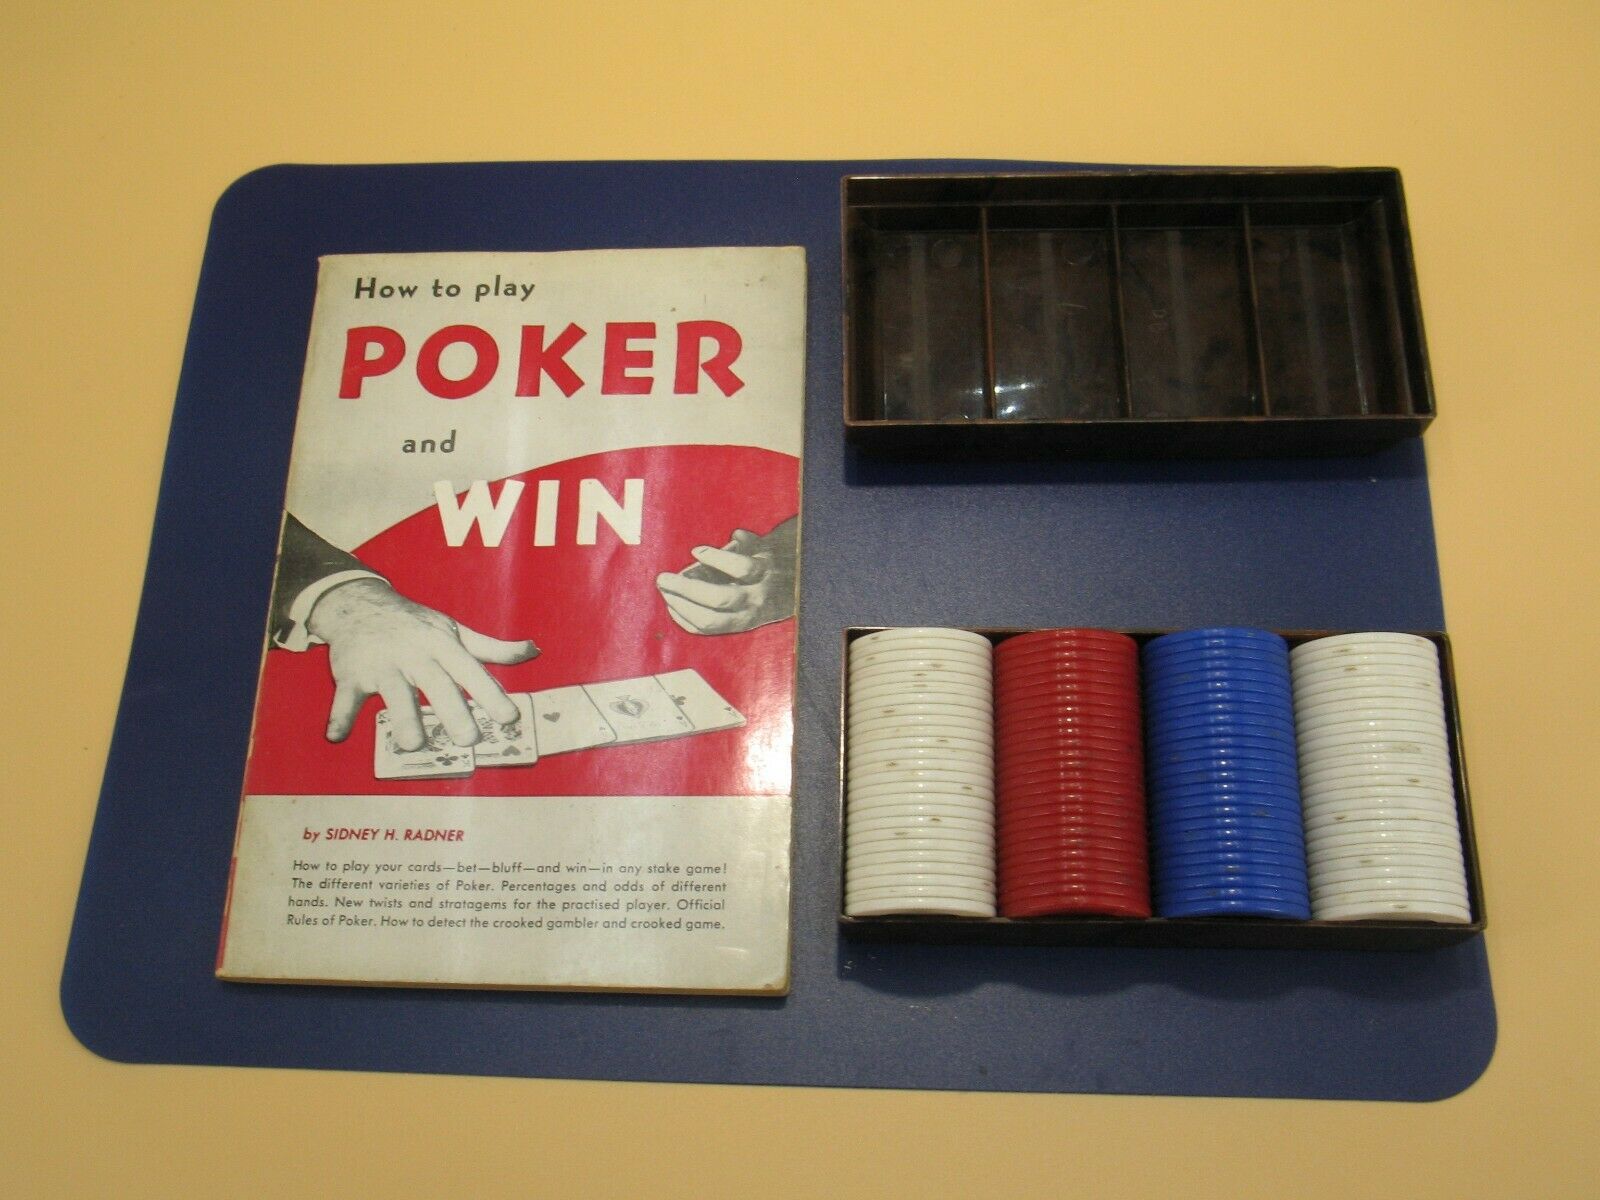 Vintage Set Of Tower Poker Chips And Book " How To Play Poker And Win" (1957)